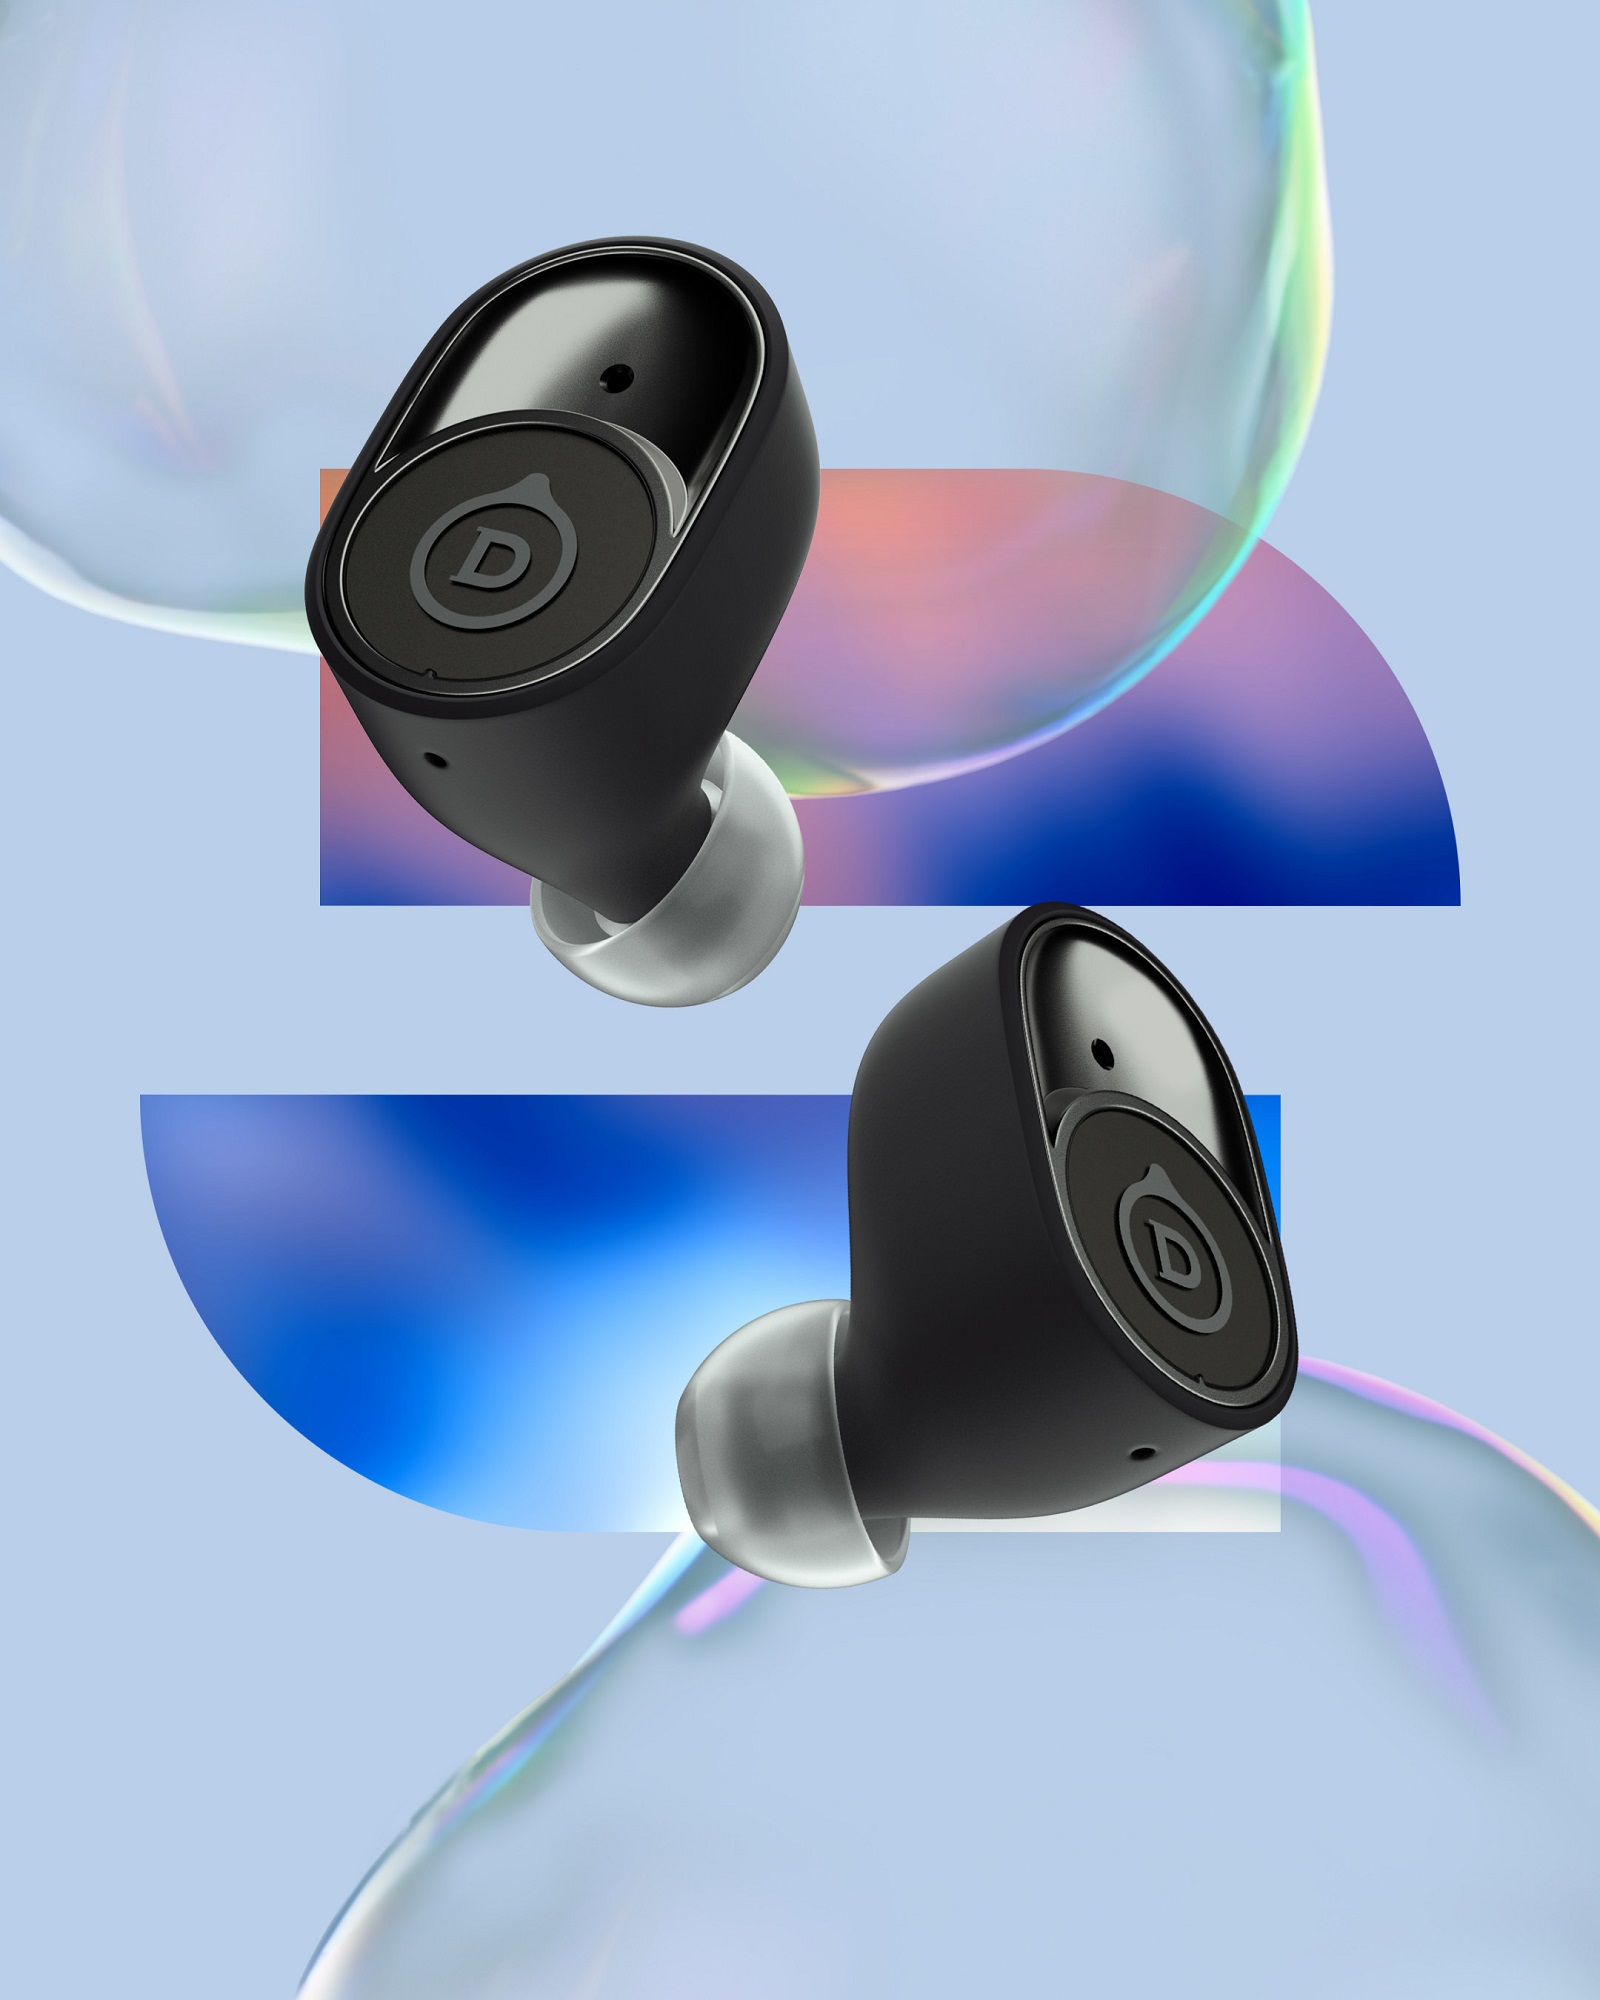 Devialet Unveils Devialet Gemini, the Company’s First True Wireless Earbuds